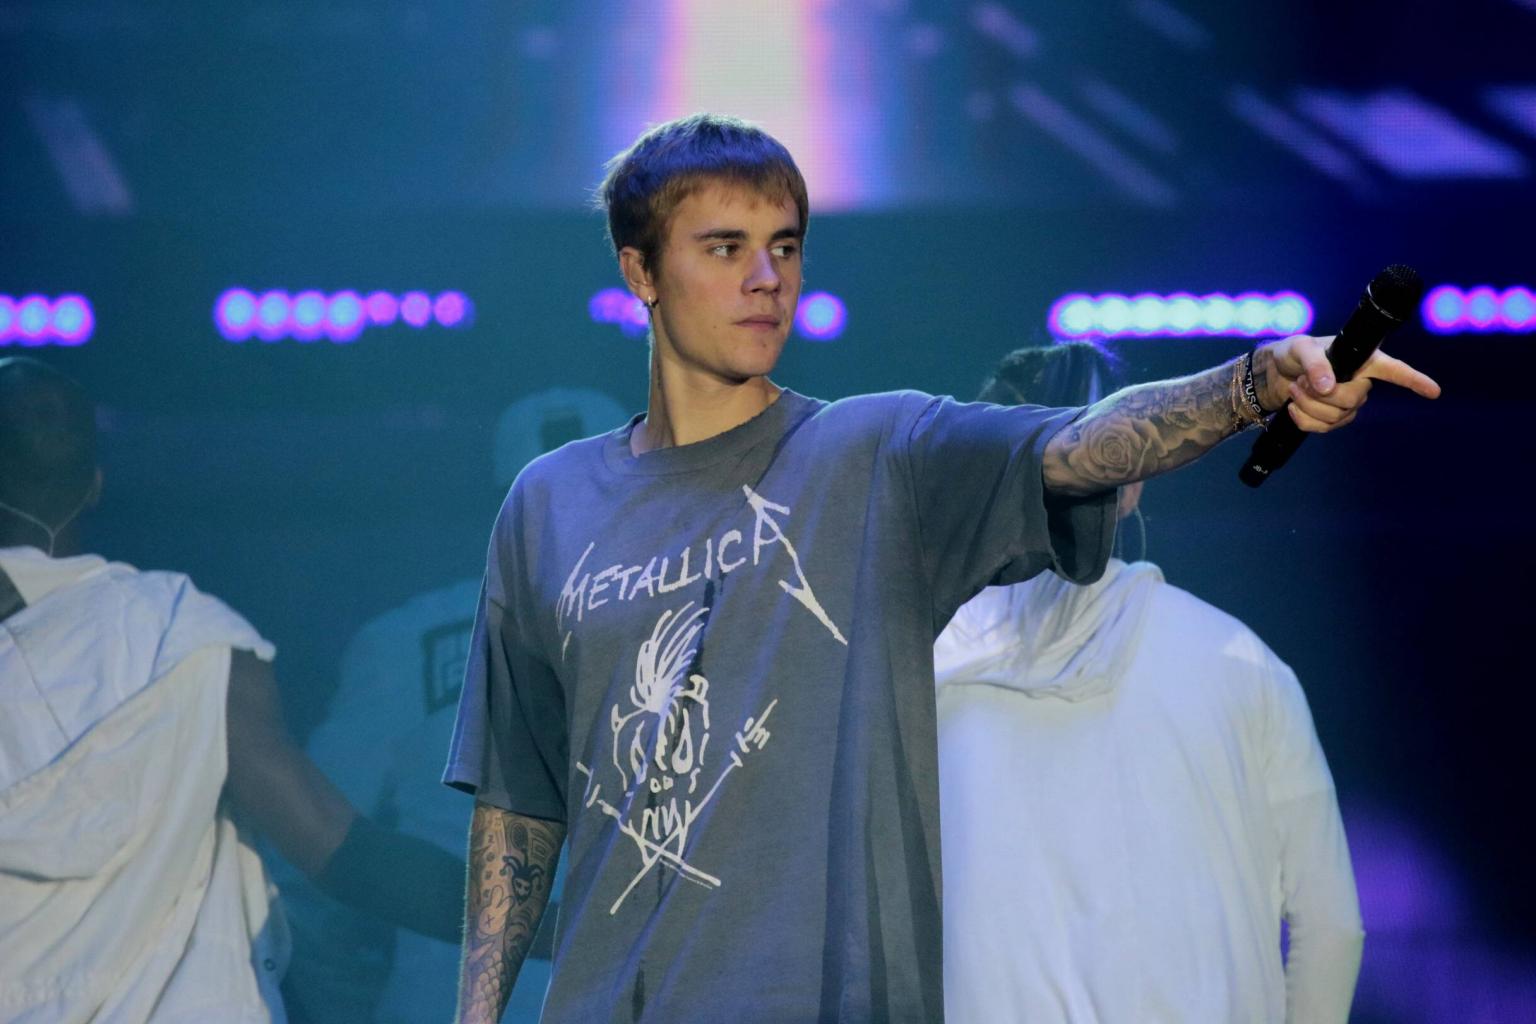 Justin Bieber Breaks Into Tears While Performing â€˜Purposeâ€™ During A Show In Germany